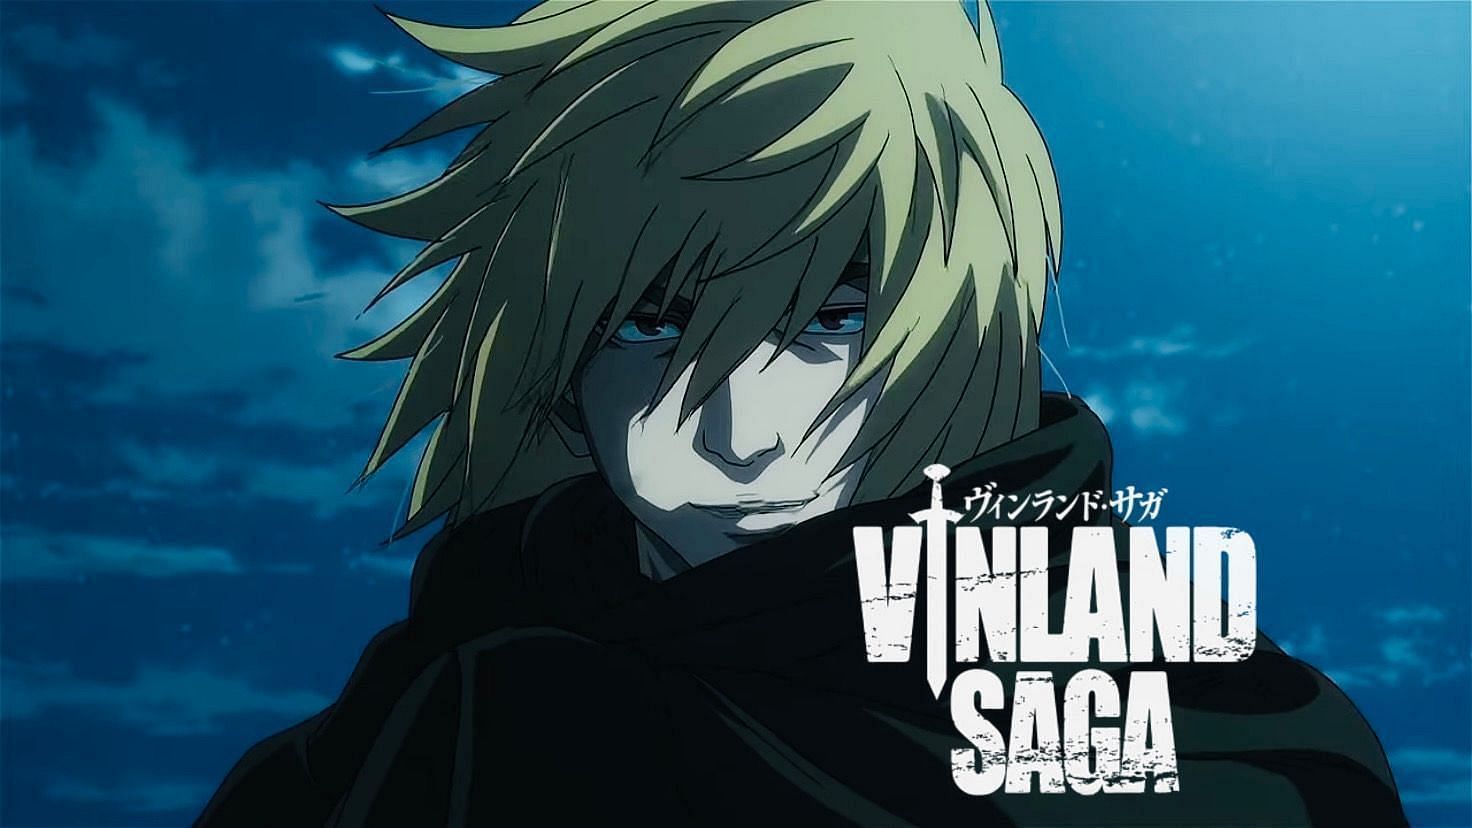 VINLAND SAGA, THE FANTASTIC ANIME SEASON HAS BEEN ACQUIRED BY